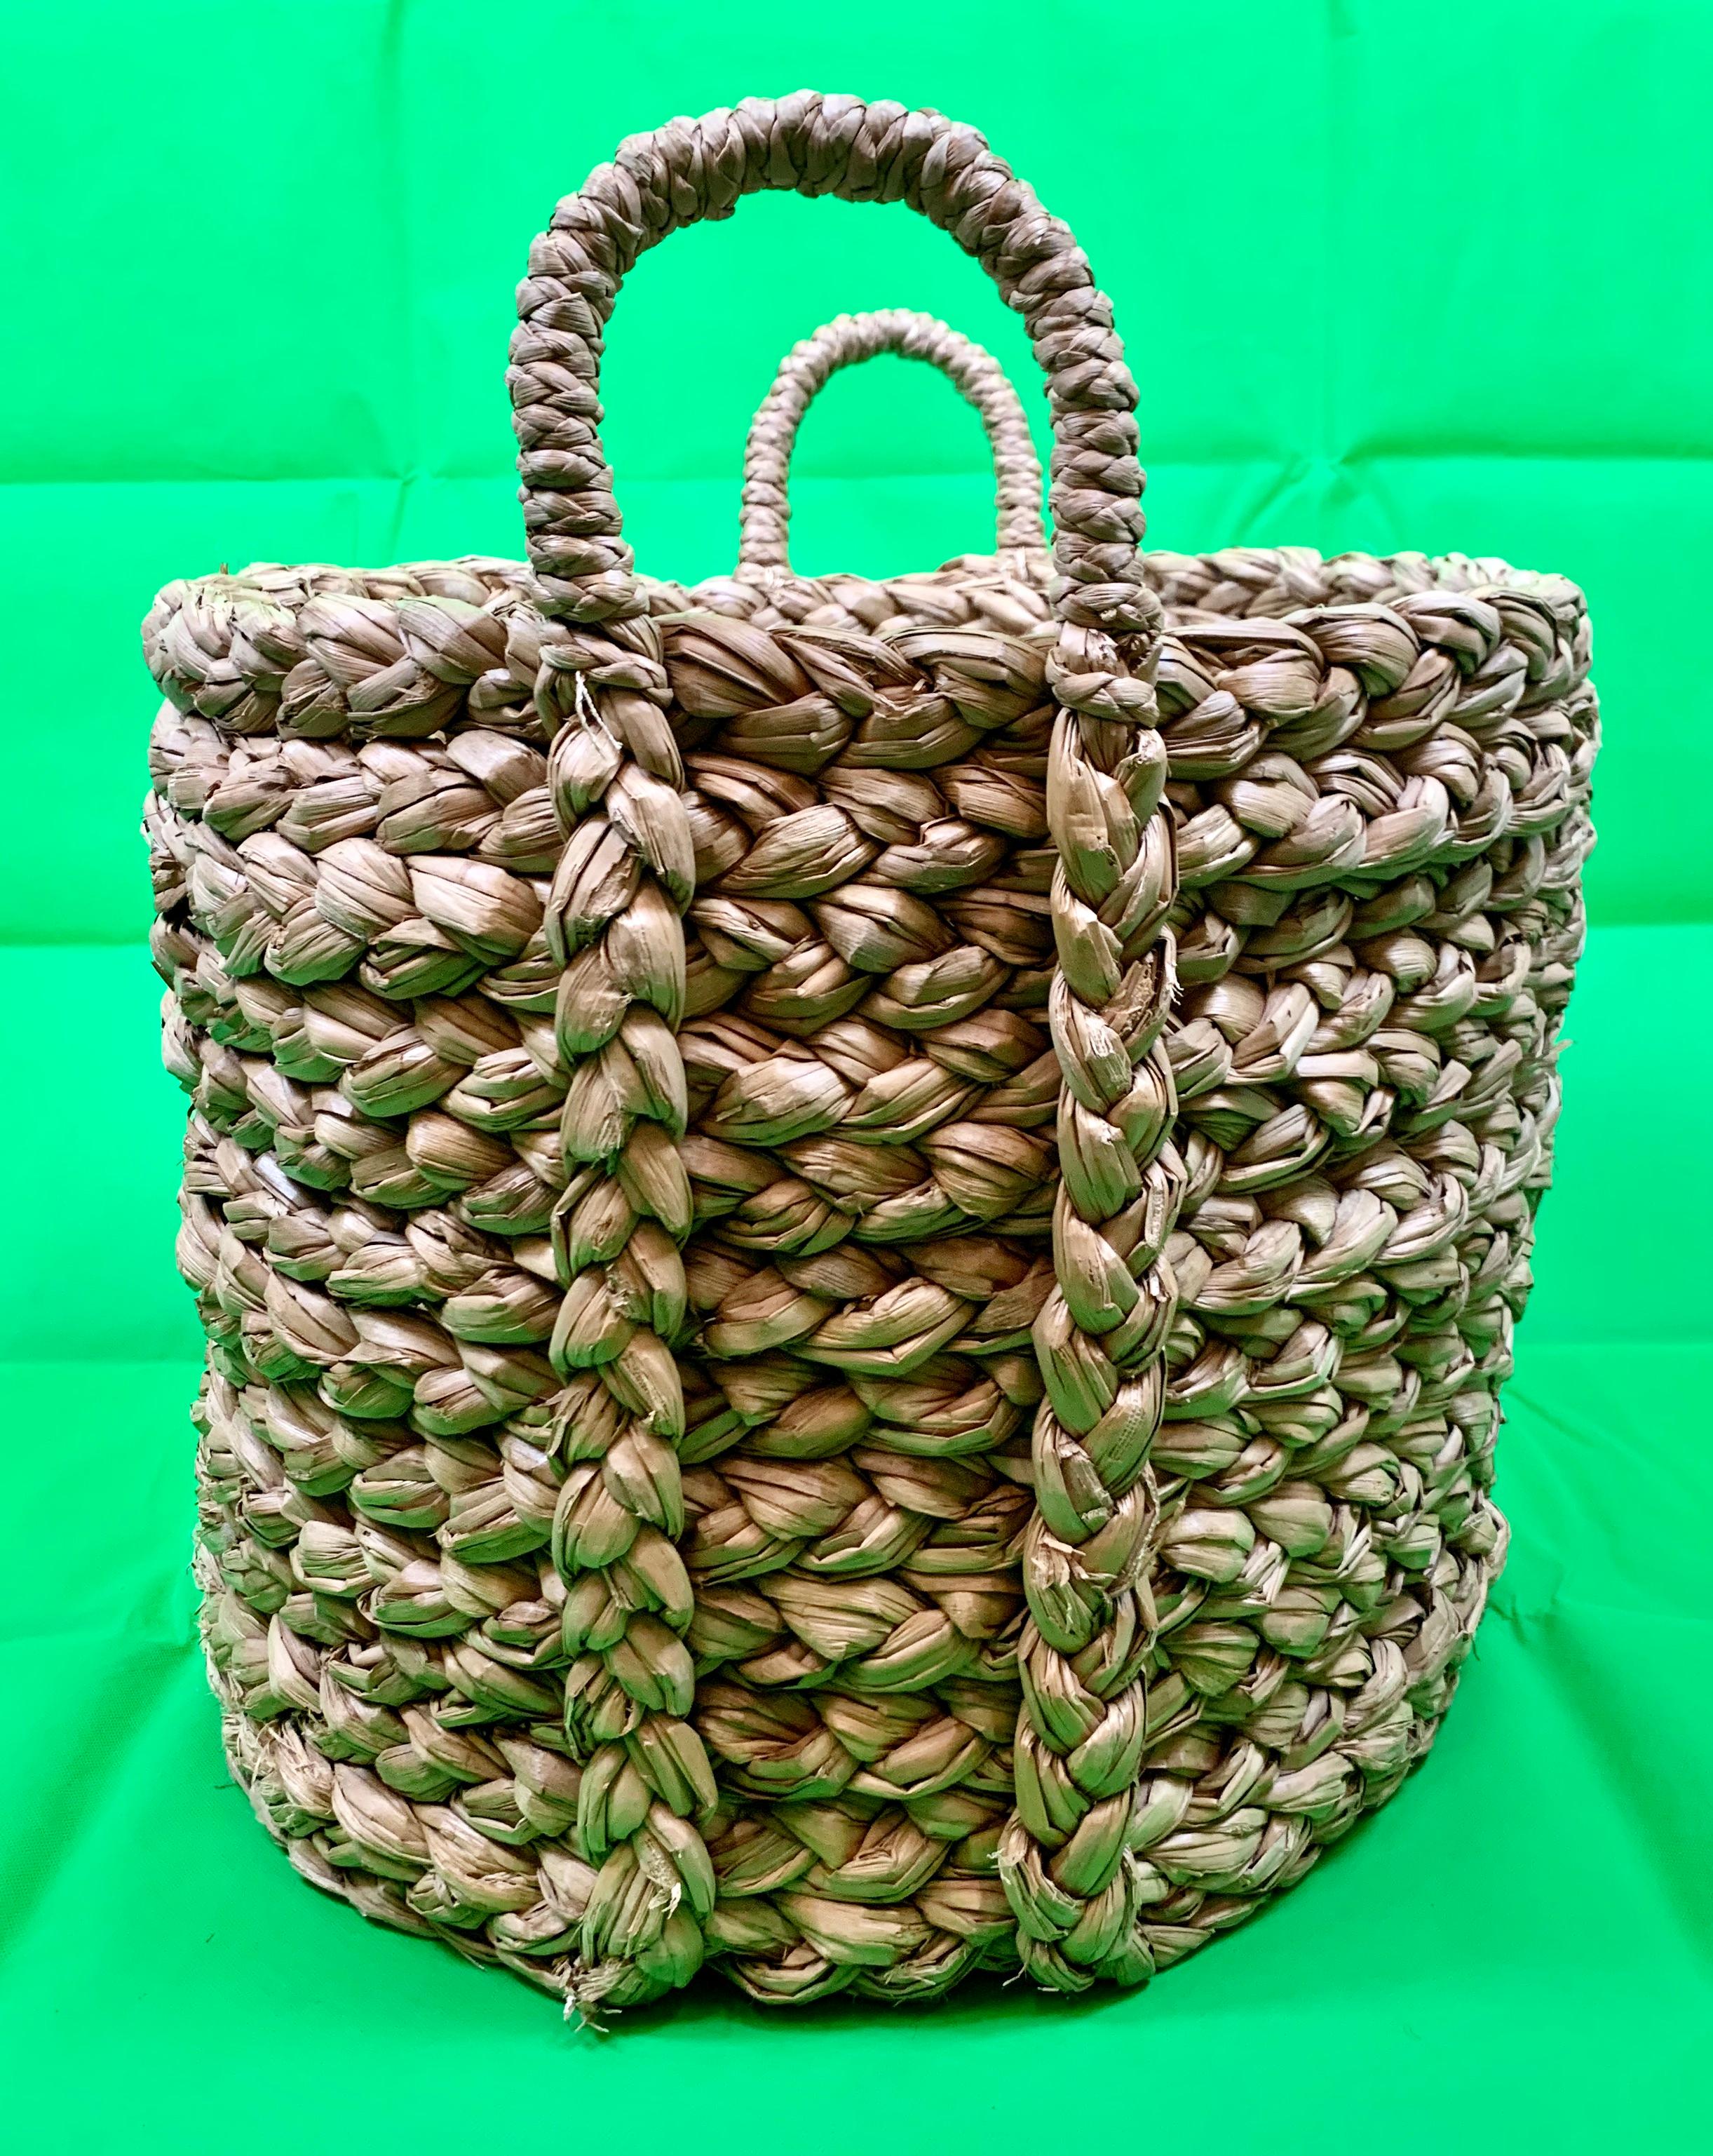 Large hand woven seagrass basket with two handles. Such a basket could have so may uses.
Perfect for logs next to a fireplace, general storage, laundry, children's toys, indoor tree........
H-17.75